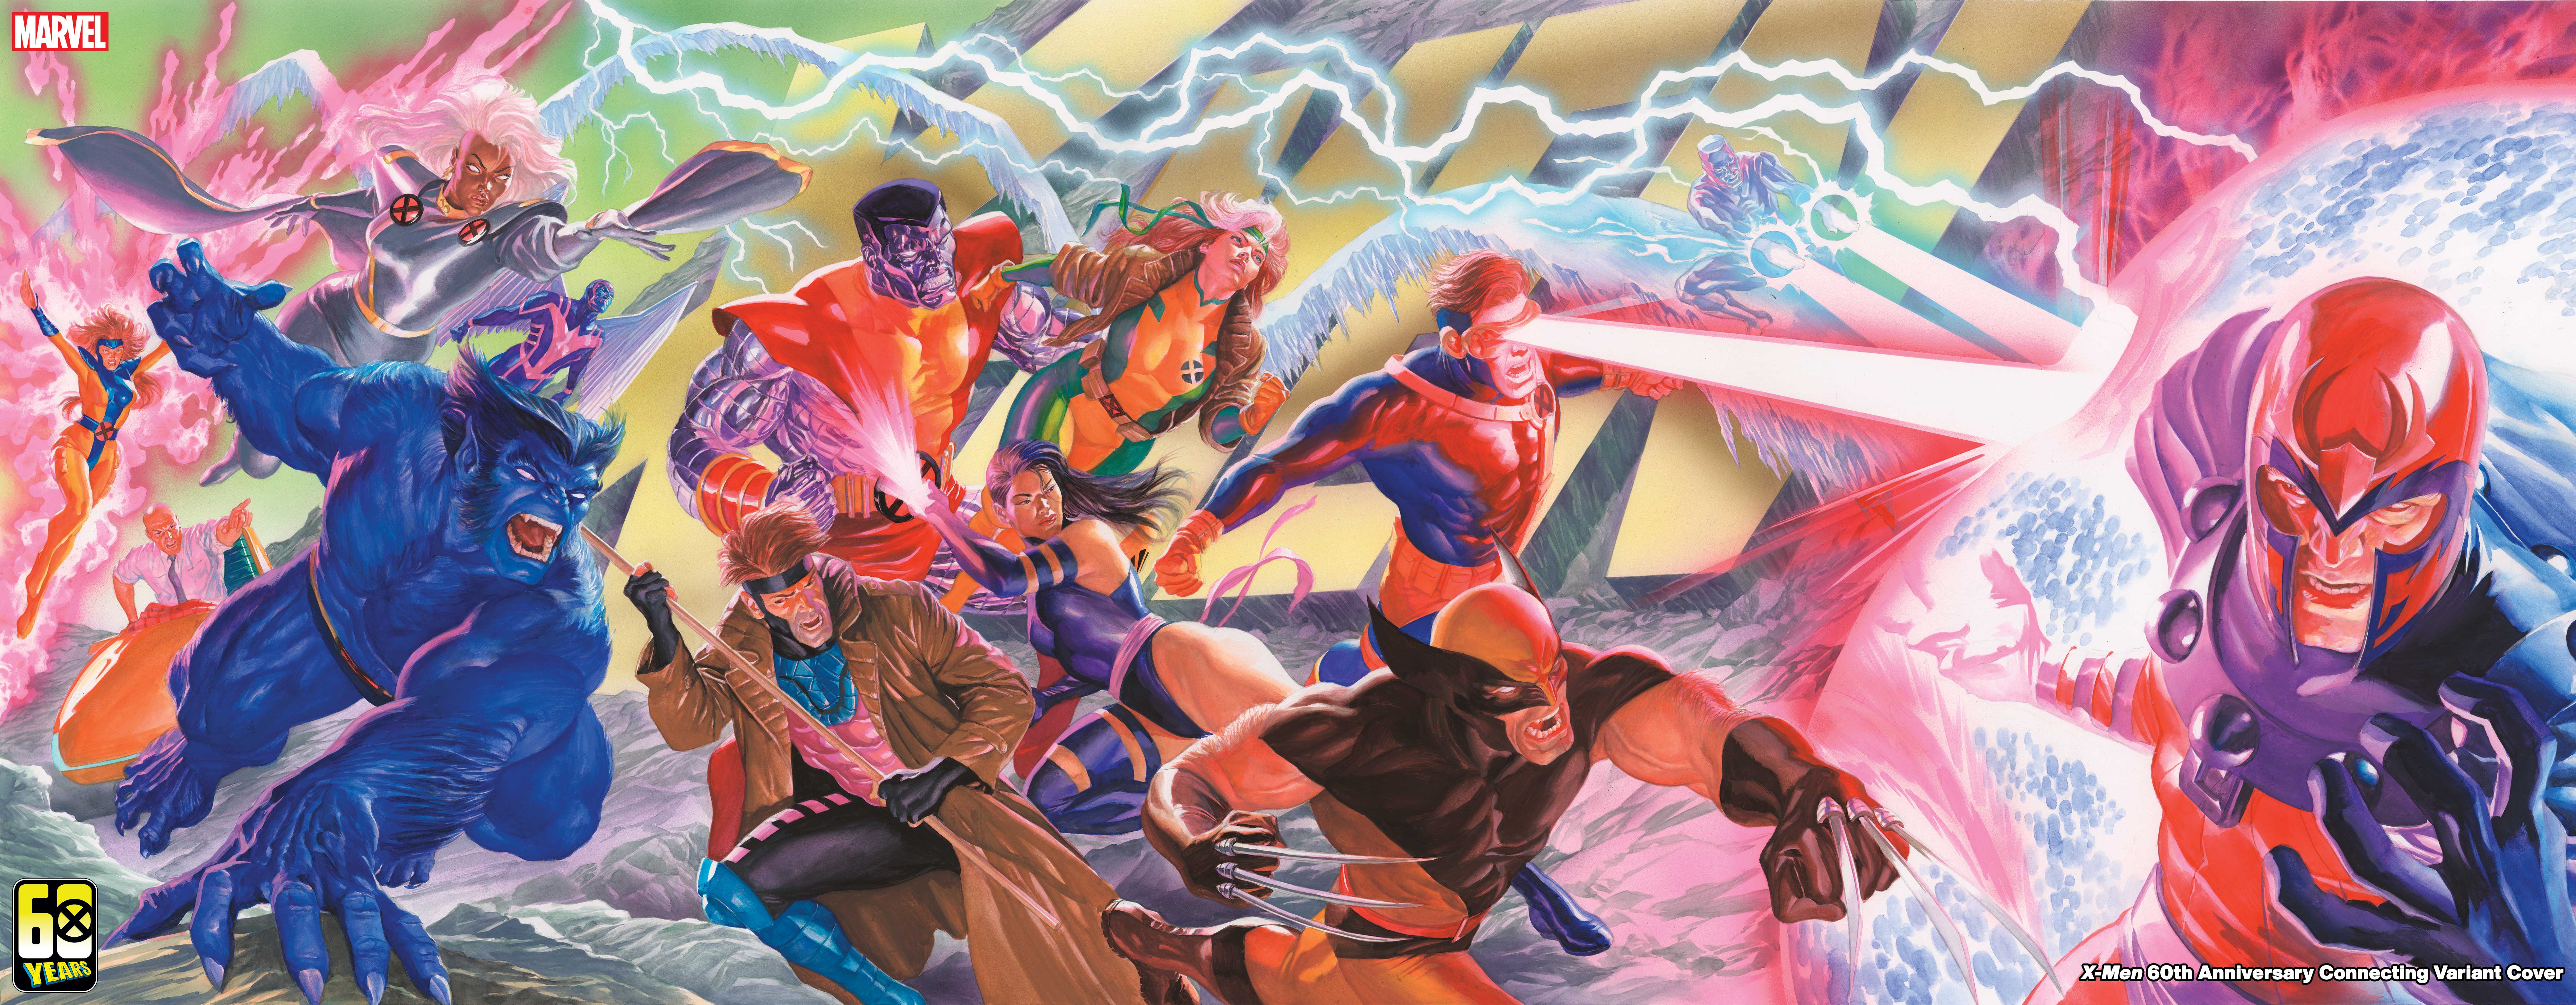 Alex Ross  X-MEN 60TH ANNIVERSARY CONNECTING COVER